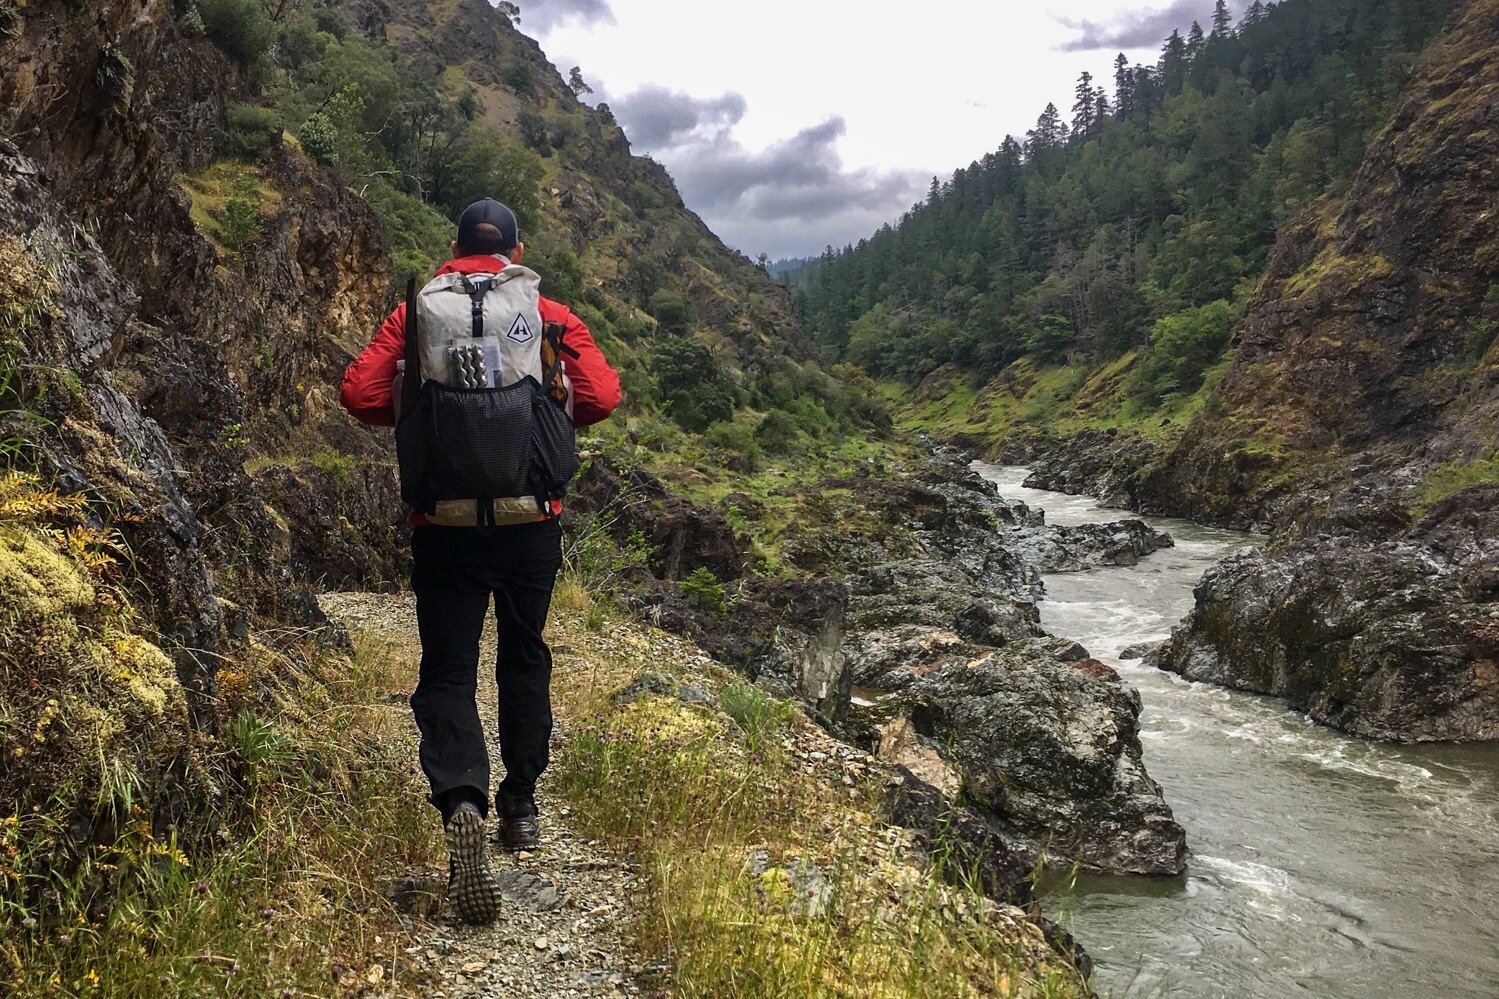 The HMG Southwest is one of the most water-resistant backpacks we’ve ever tested.